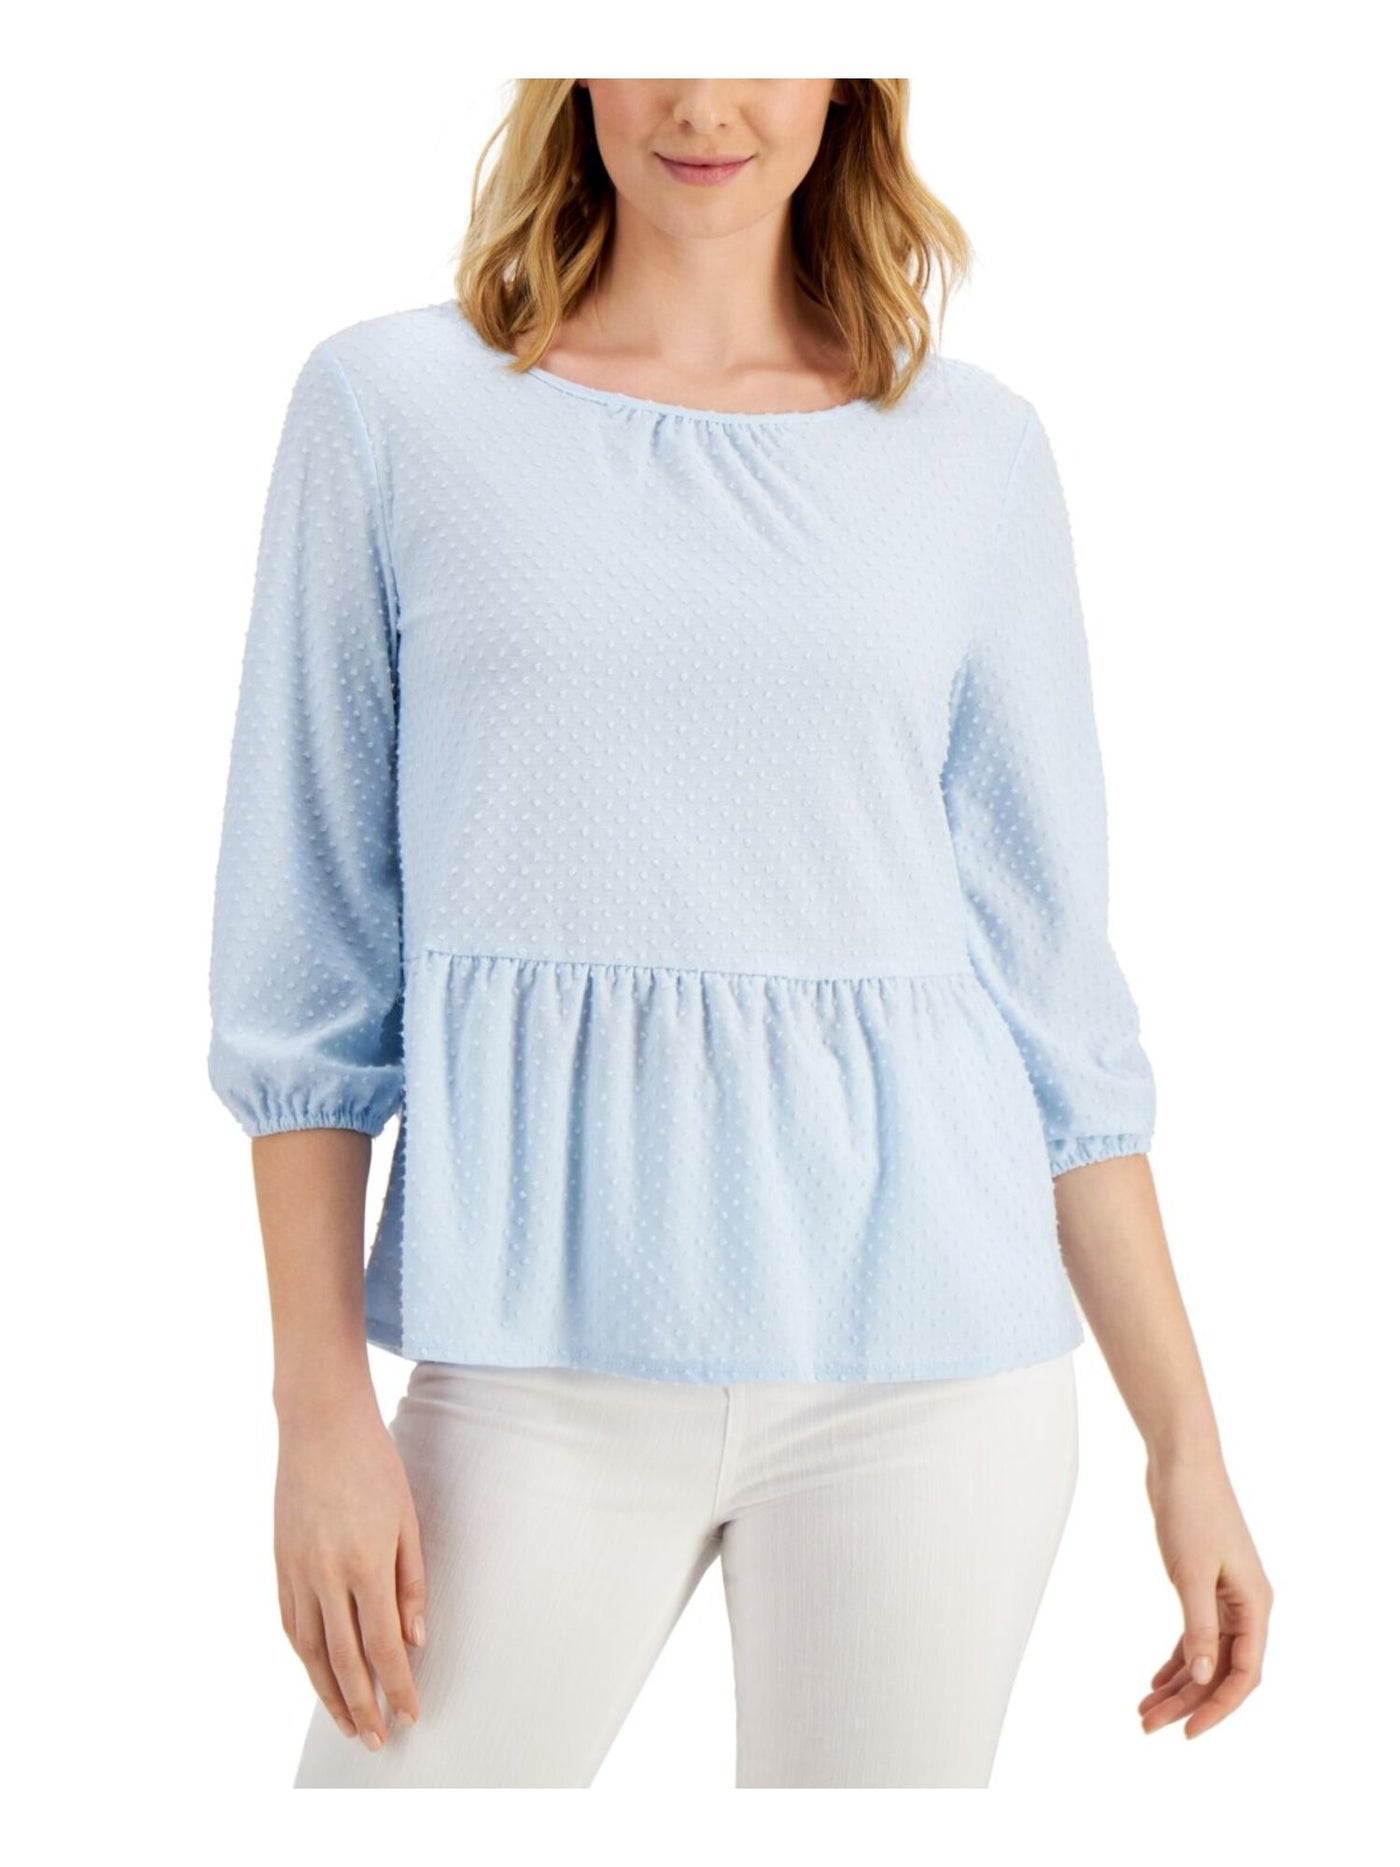 STYLE & COMPANY Womens Light Blue Textured 3/4 Sleeve Top Size: XXL